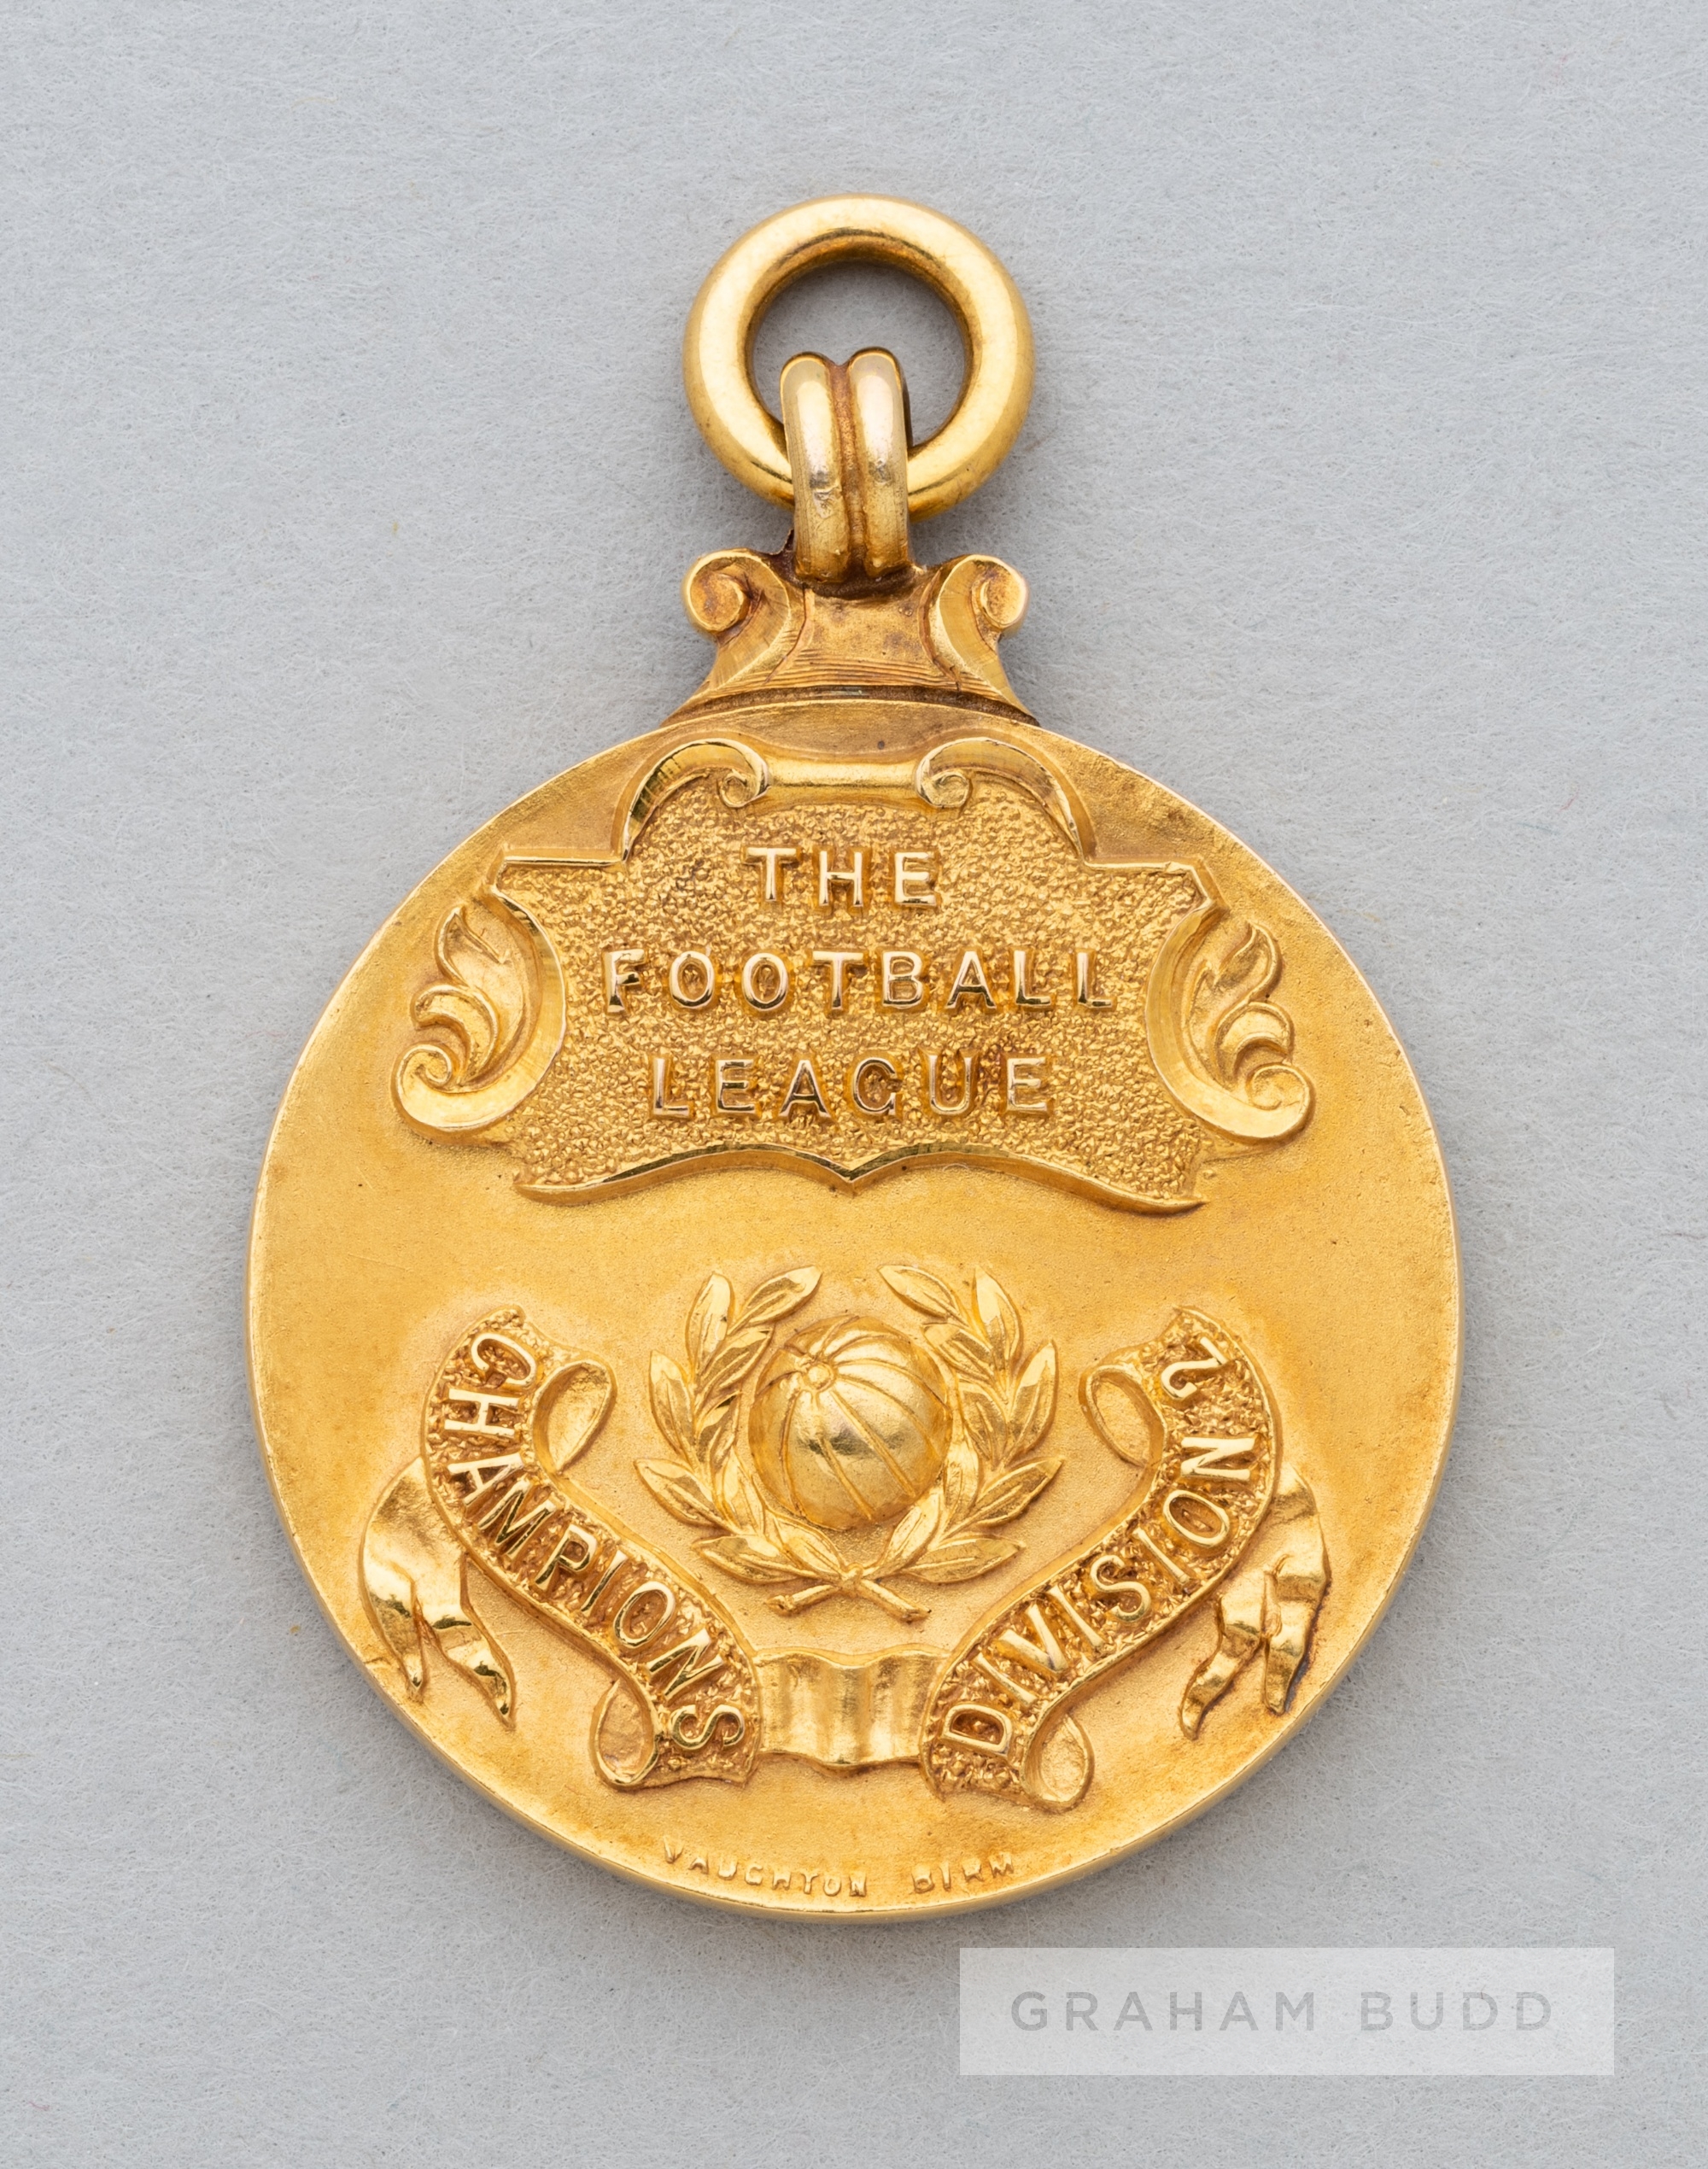 Football League 1946-47 Division Two Championship medal awarded to Bert Sproston of Manchester City,